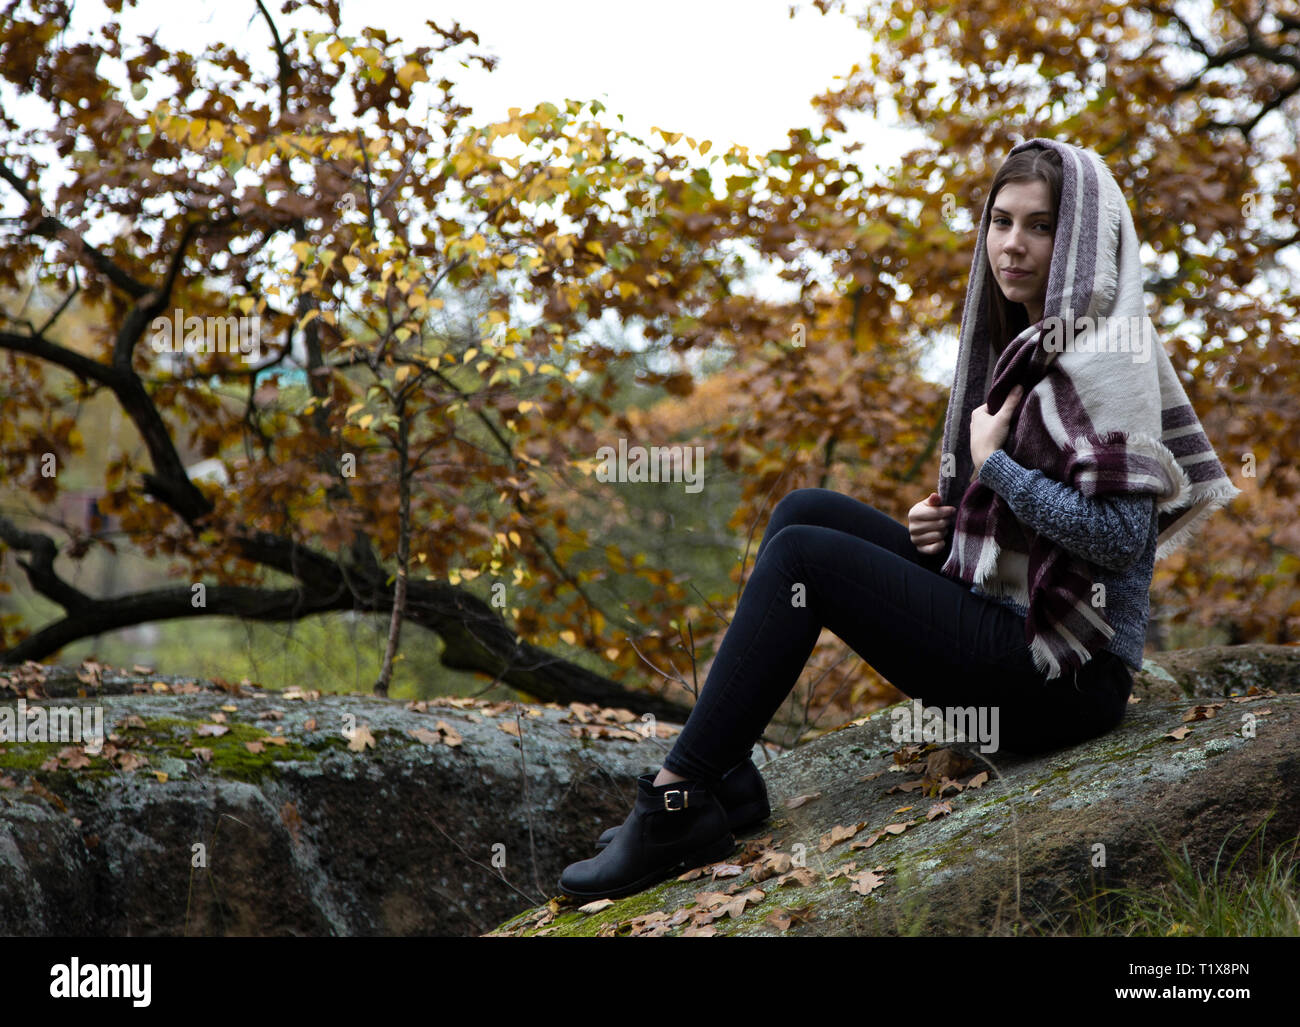 A cute, beautiful, modest religion girl with a scarf or scarf on her head is sitting in the autumn in a park on a stone. Moss and yellow leaves around Stock Photo